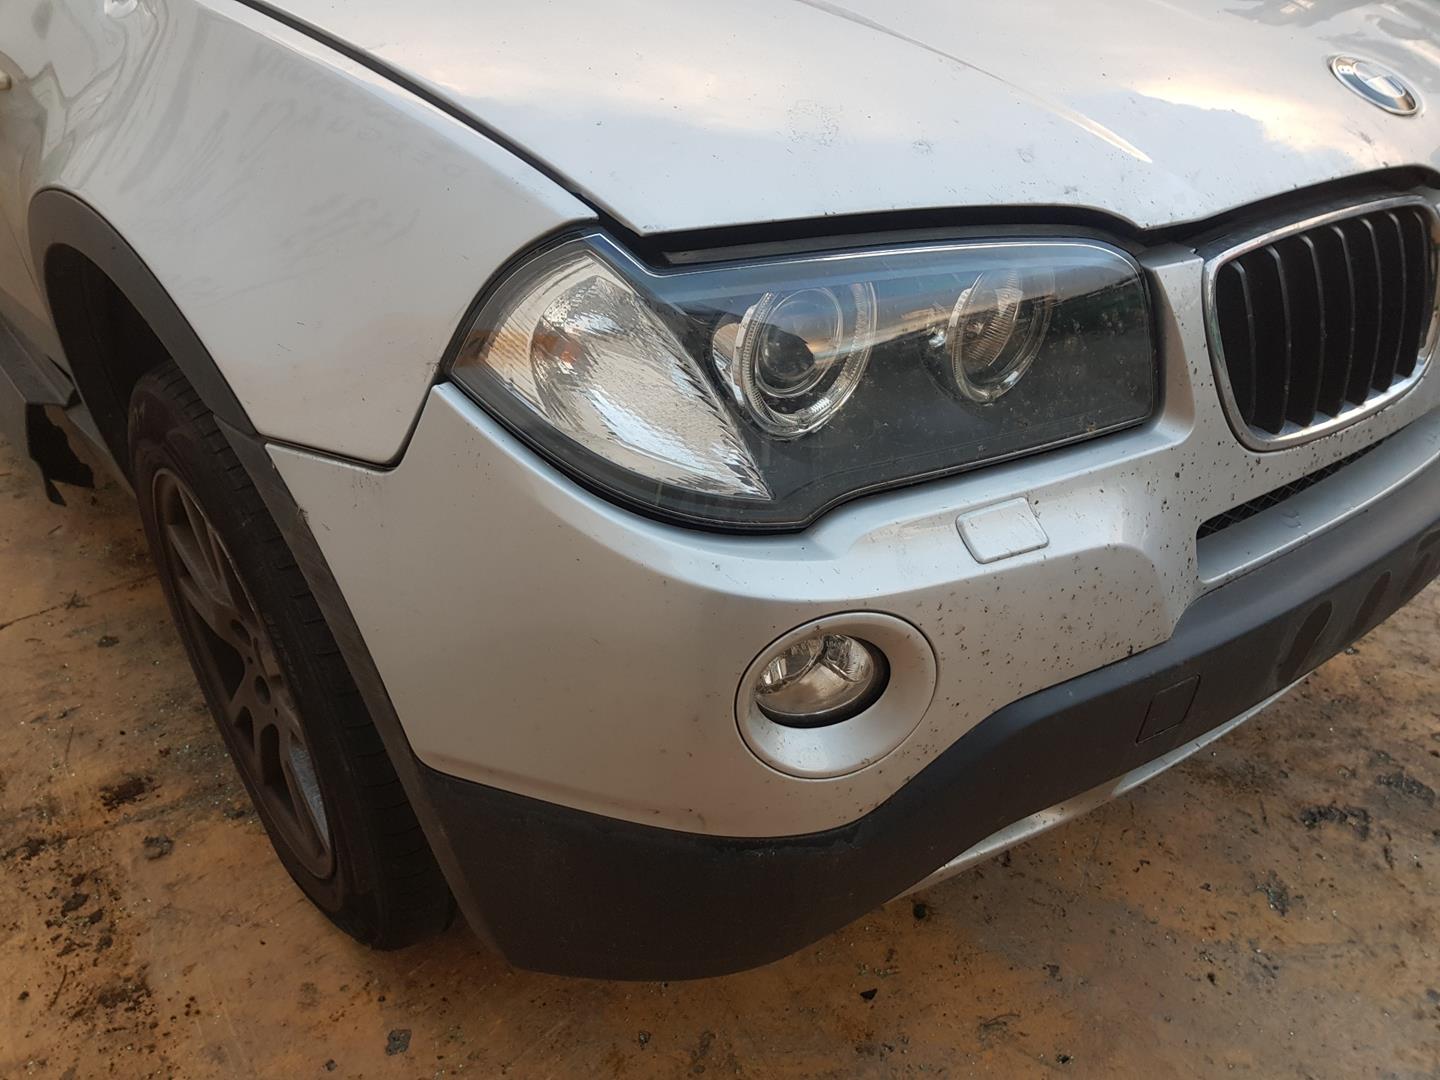 BMW X3 E83 (2003-2010) Other Body Parts 51243400379, 51243400379 19773902